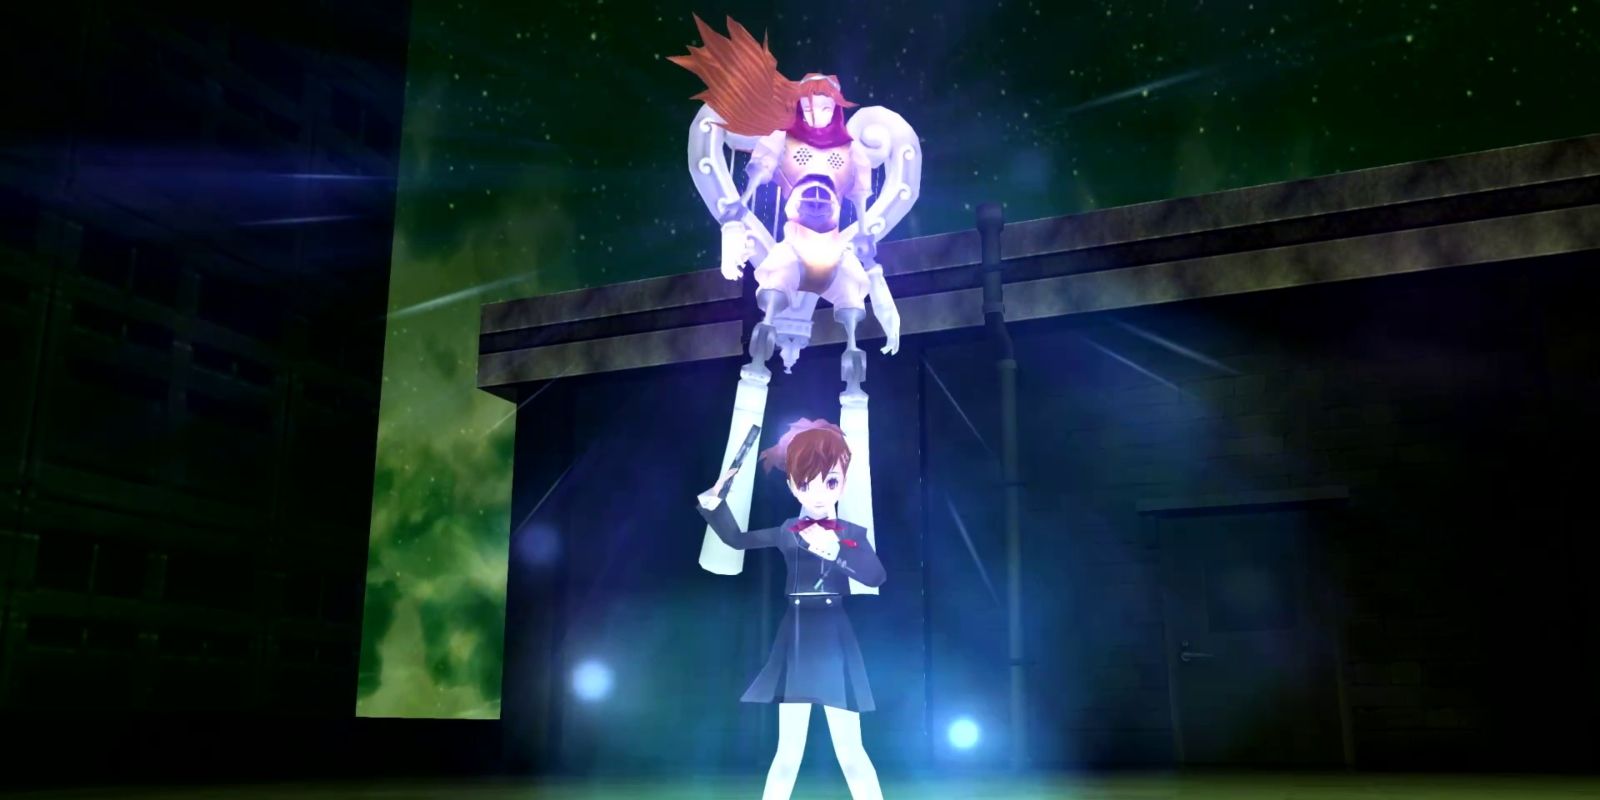 Persona 3 Portable female protagonist summoning her Persona, Orpheus in battle